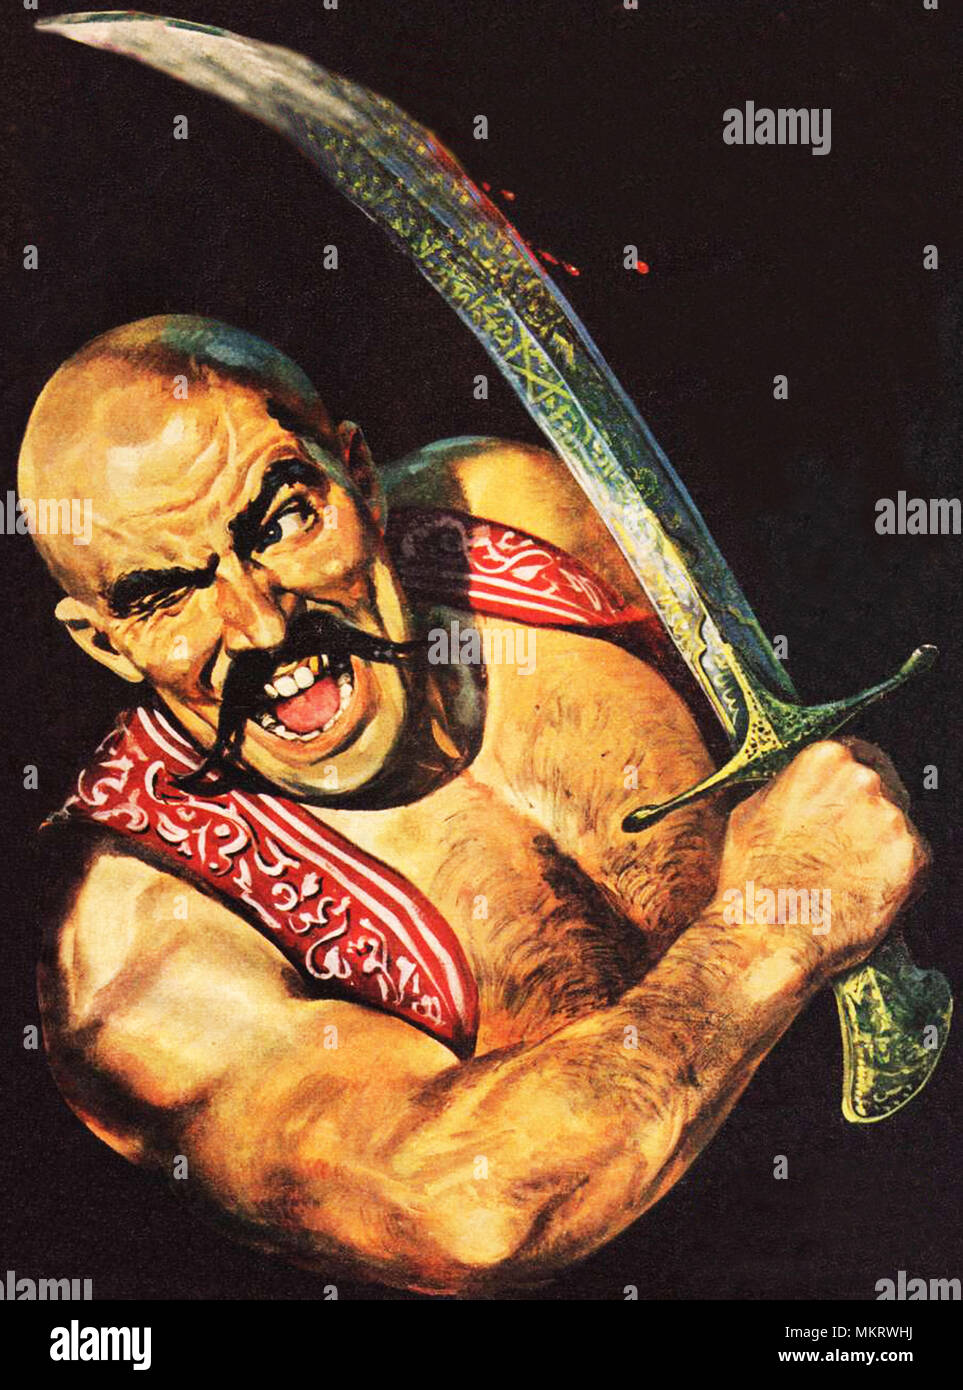 A pirate attacking with a bloodied sword Stock Photo